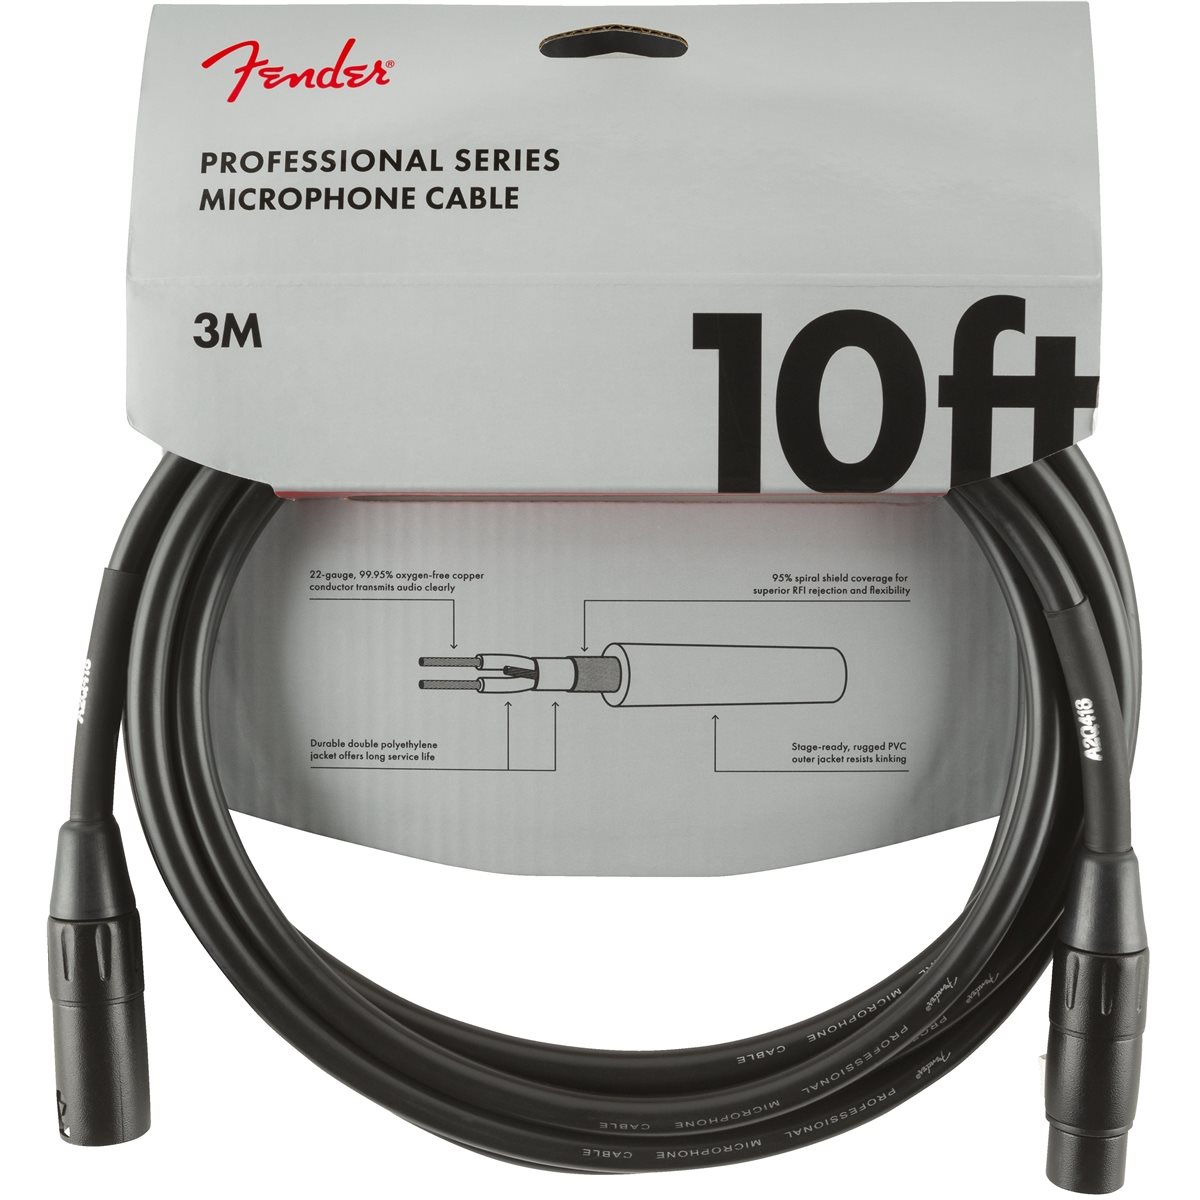 FENDER - PROFESSIONAL SERIES MICROPHONE CABLE - 10`